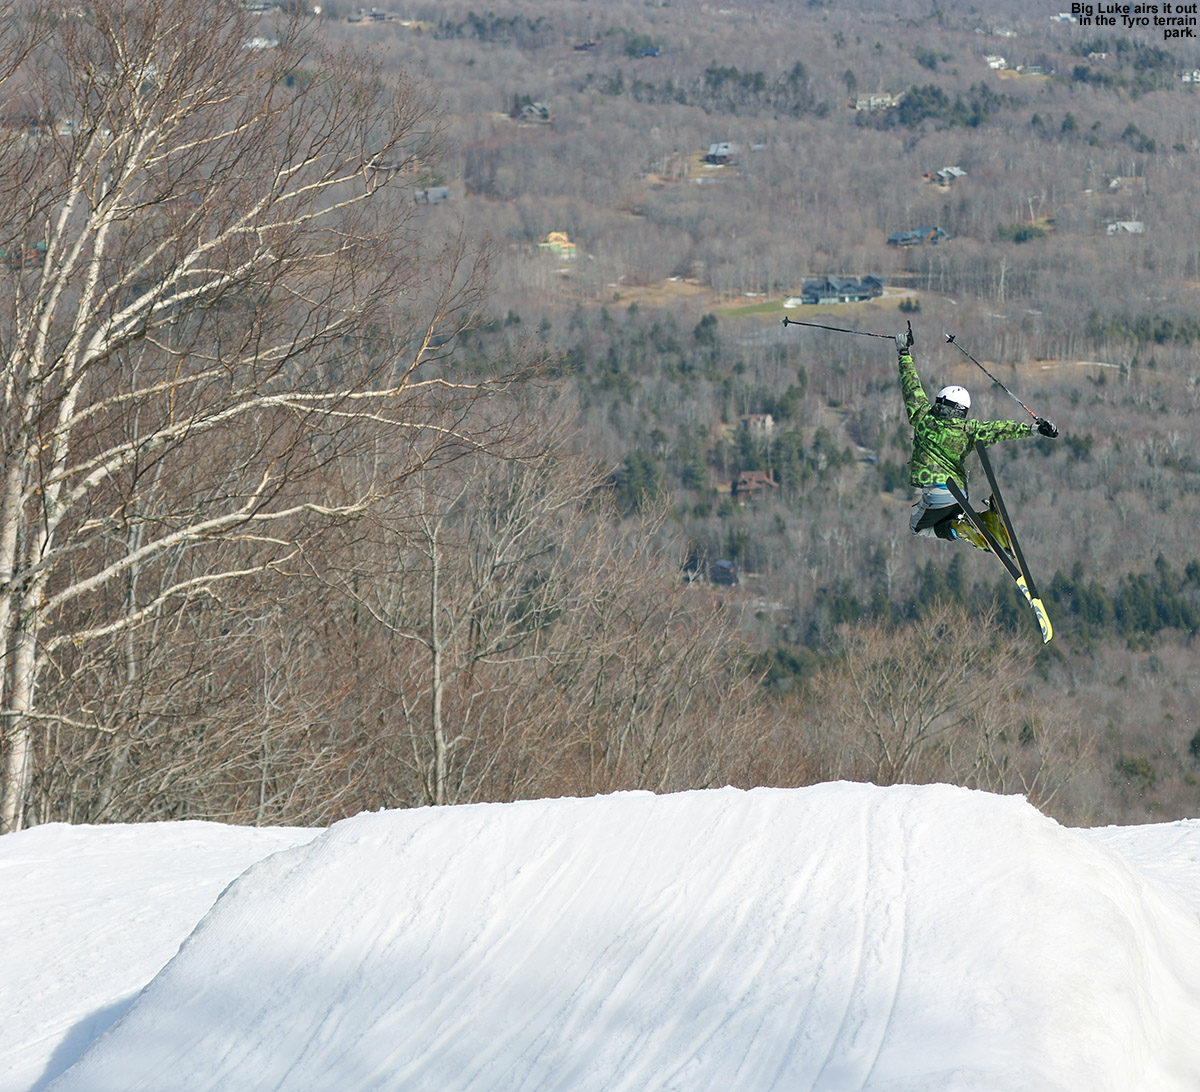 An image of Luke in the air after a jump in the Tyro Terrain Park at Stowe Mountain Resort in Vermont